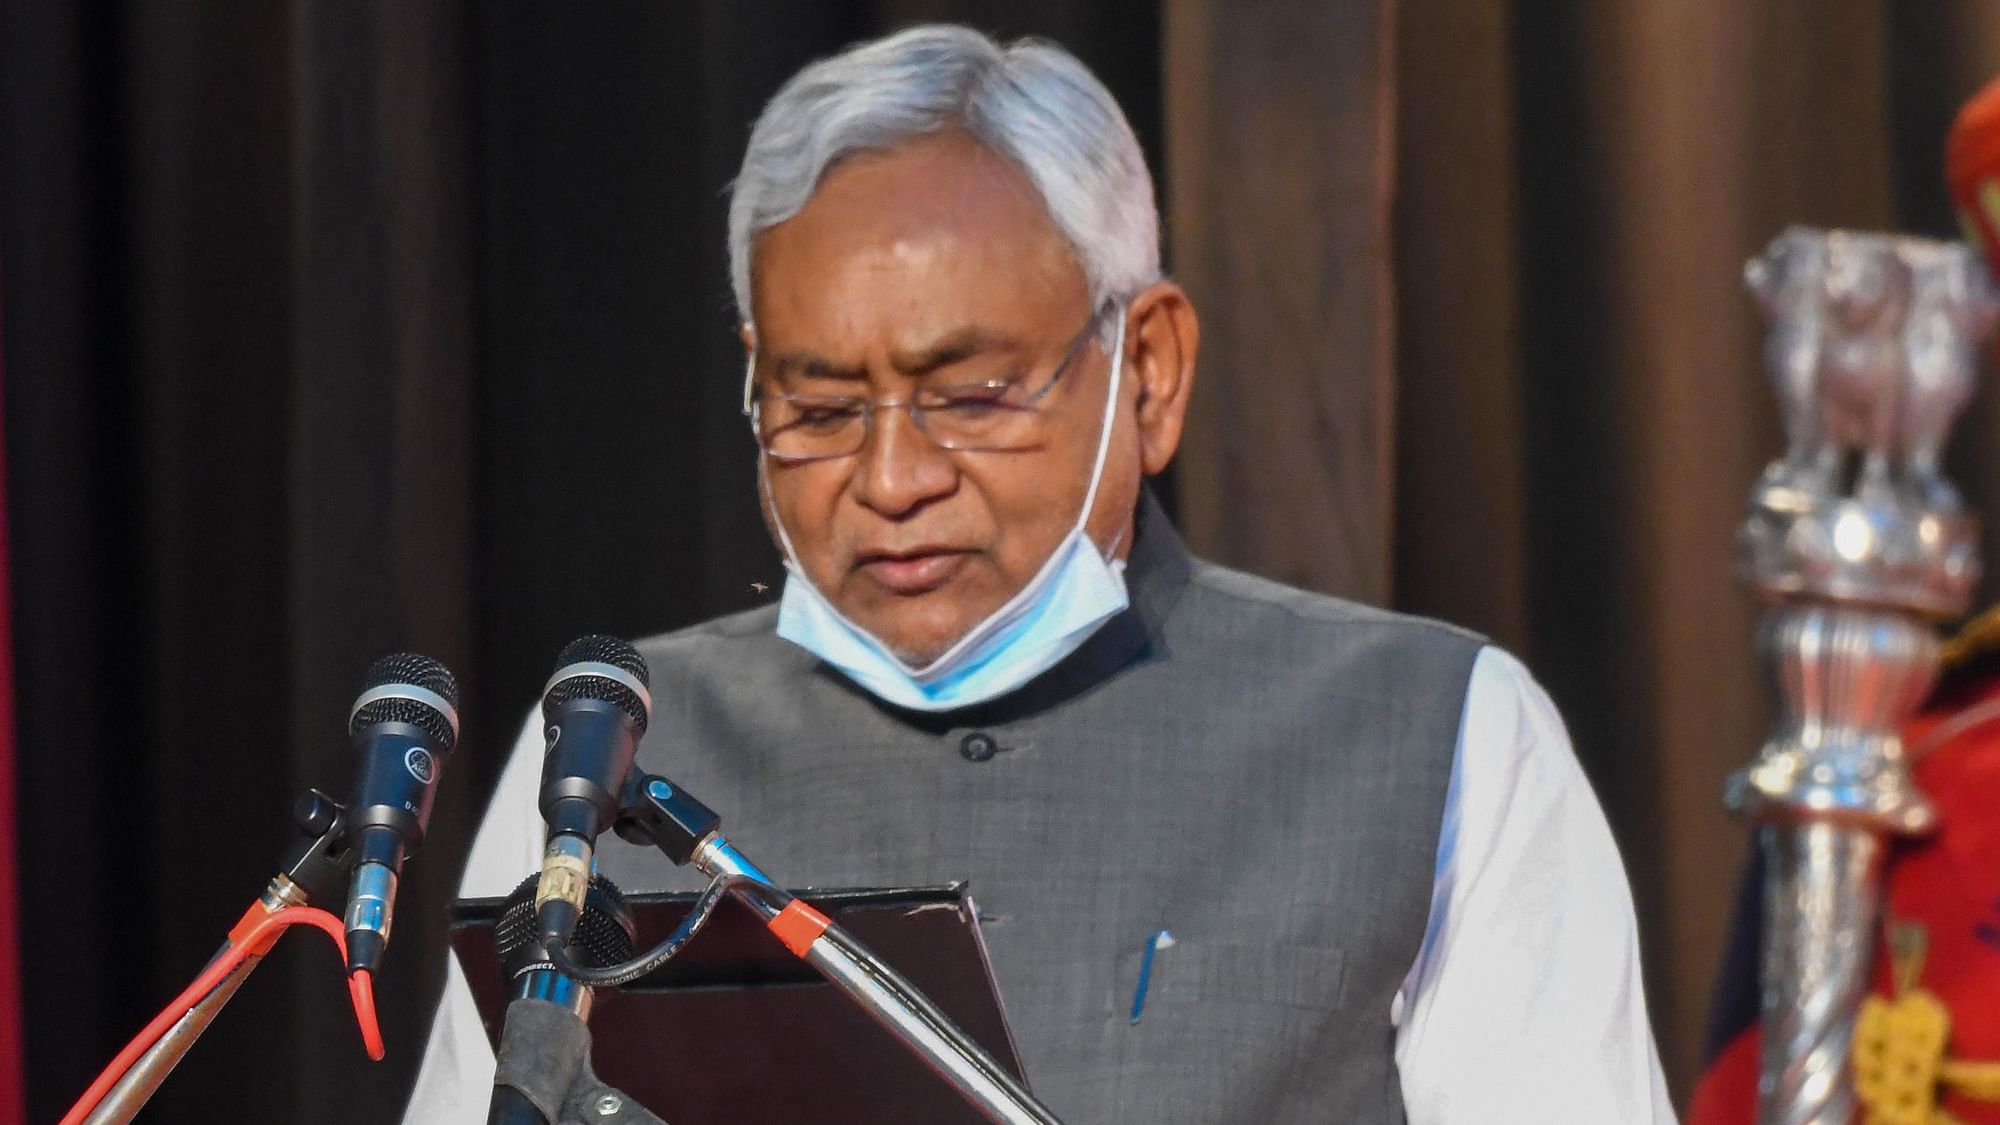 Bihar Chief Minister Nitish Kumar on Monday, 16 November, took oath as CM for his fourth consecutive term.